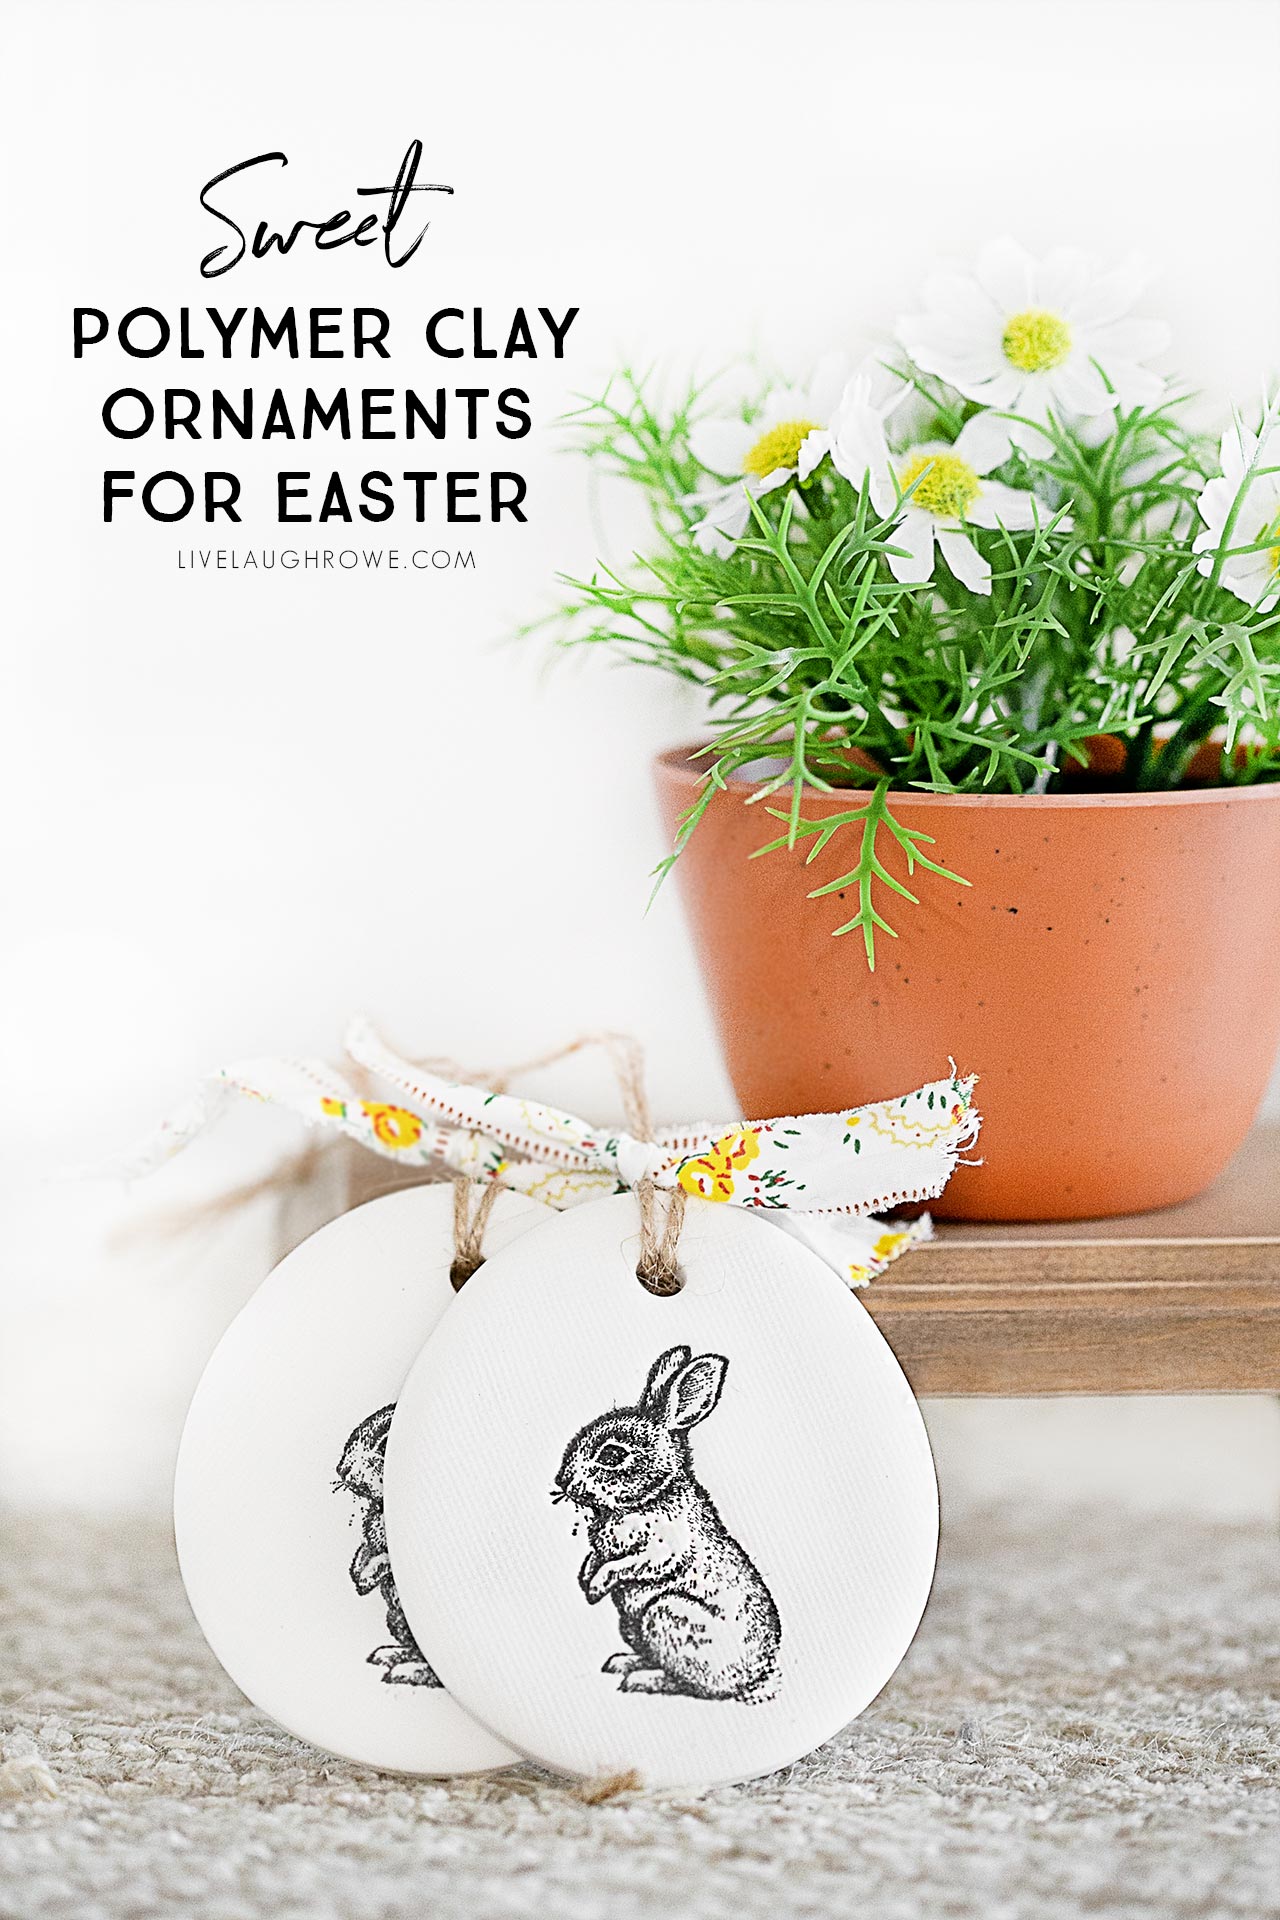 Polymer Clay Ornaments for Easter